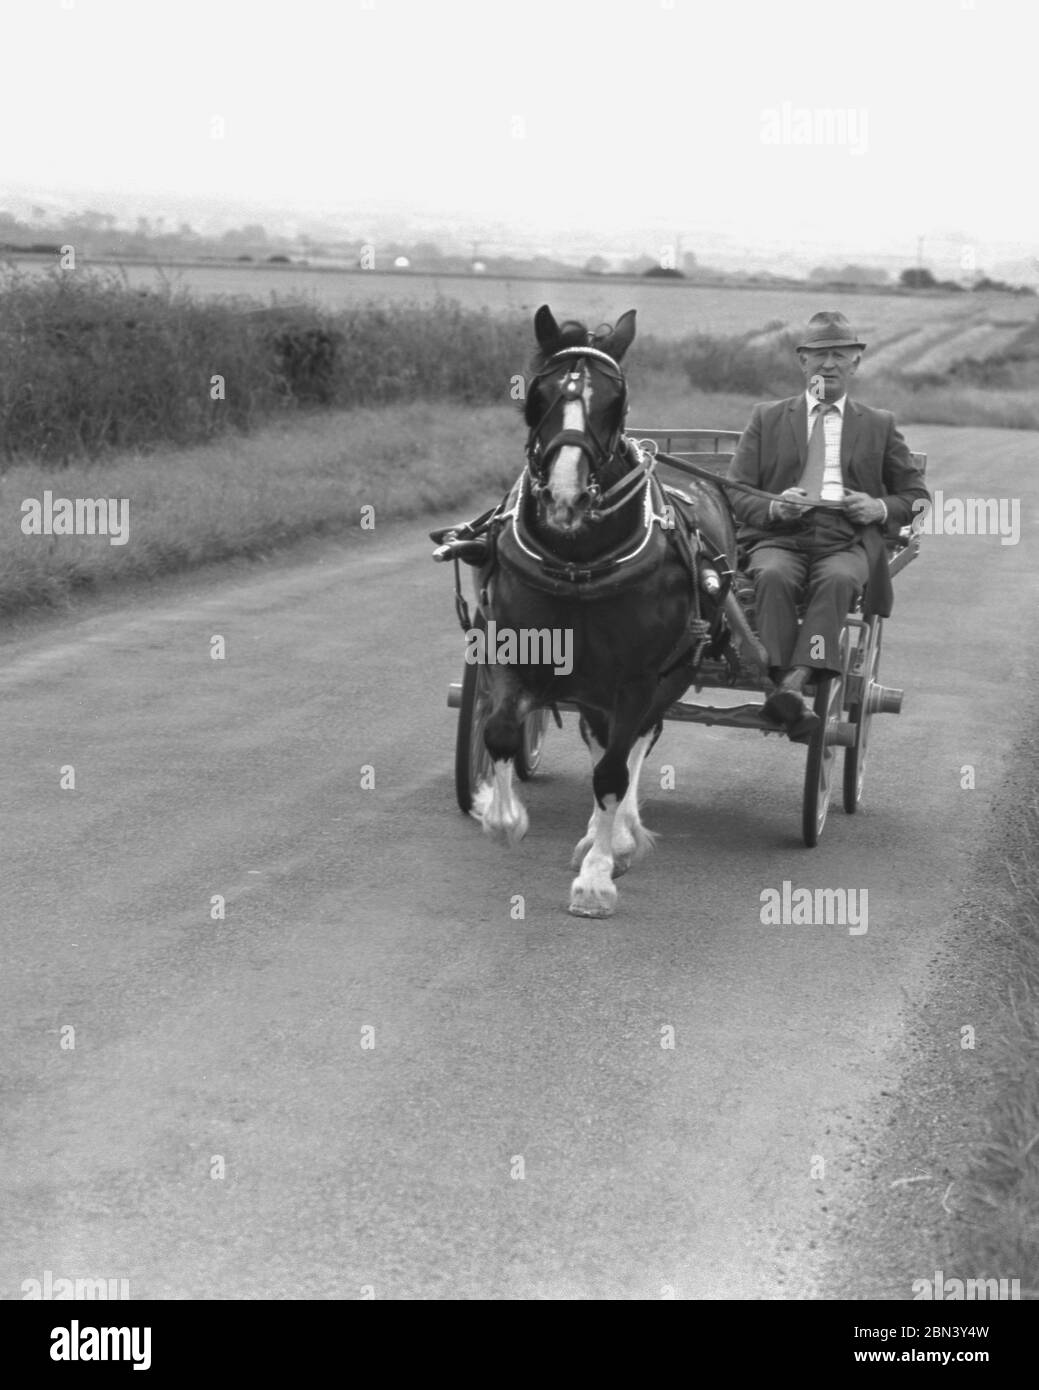 1980s, a traveller gentleman wearing a suit and tie and hat, riding his horse and cart on an open country road, Yorkshire, England, UK. Stock Photo